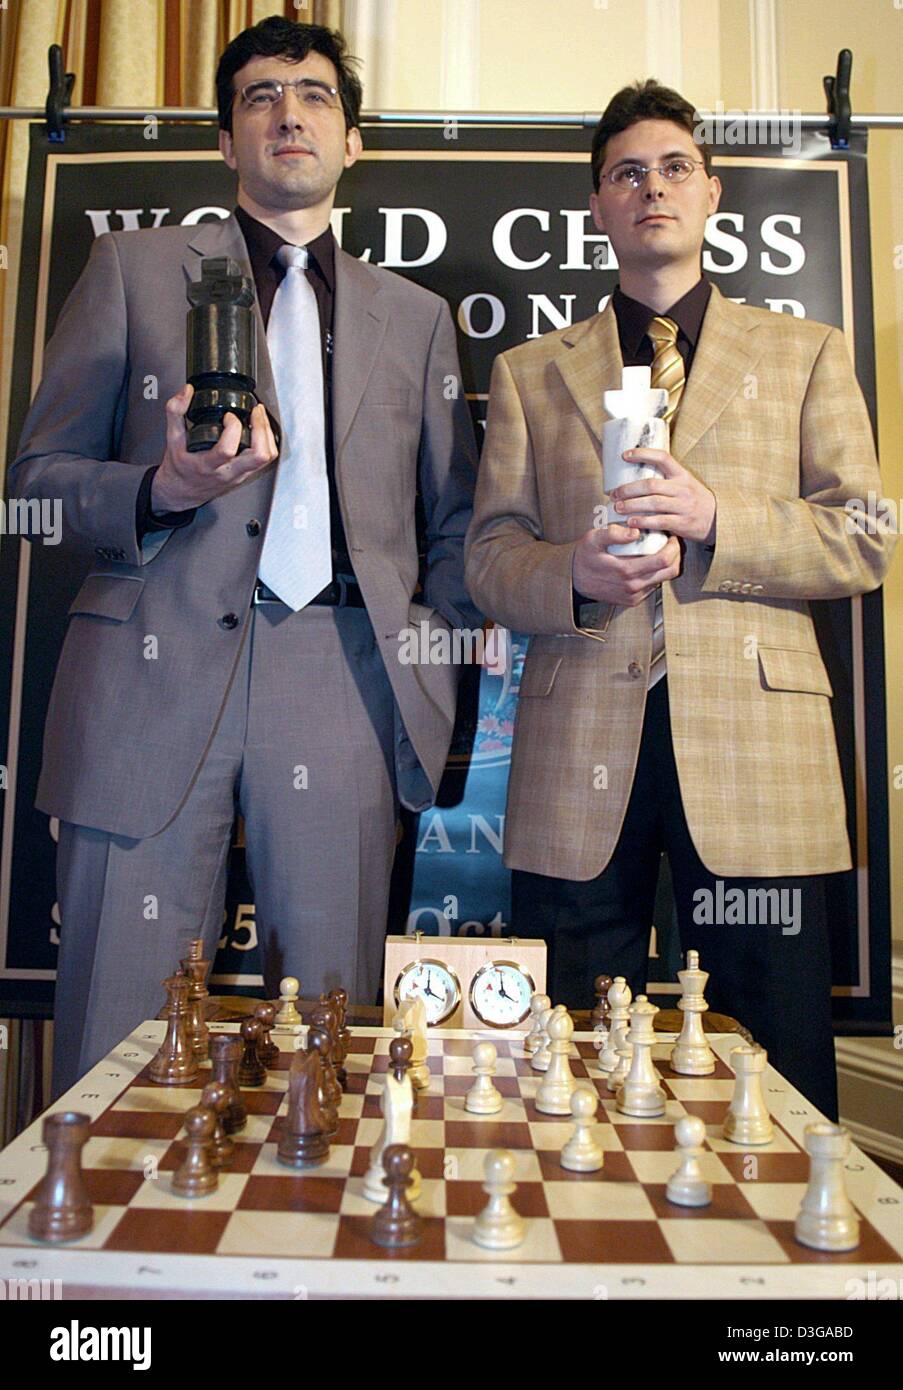 - Reigning Chess World Champion Vladimir Kramnik (L) from Russia and challenger Peter Leko pose with large chessmen during a press conference in Hamburg, Germany, 12 May 2004. During the